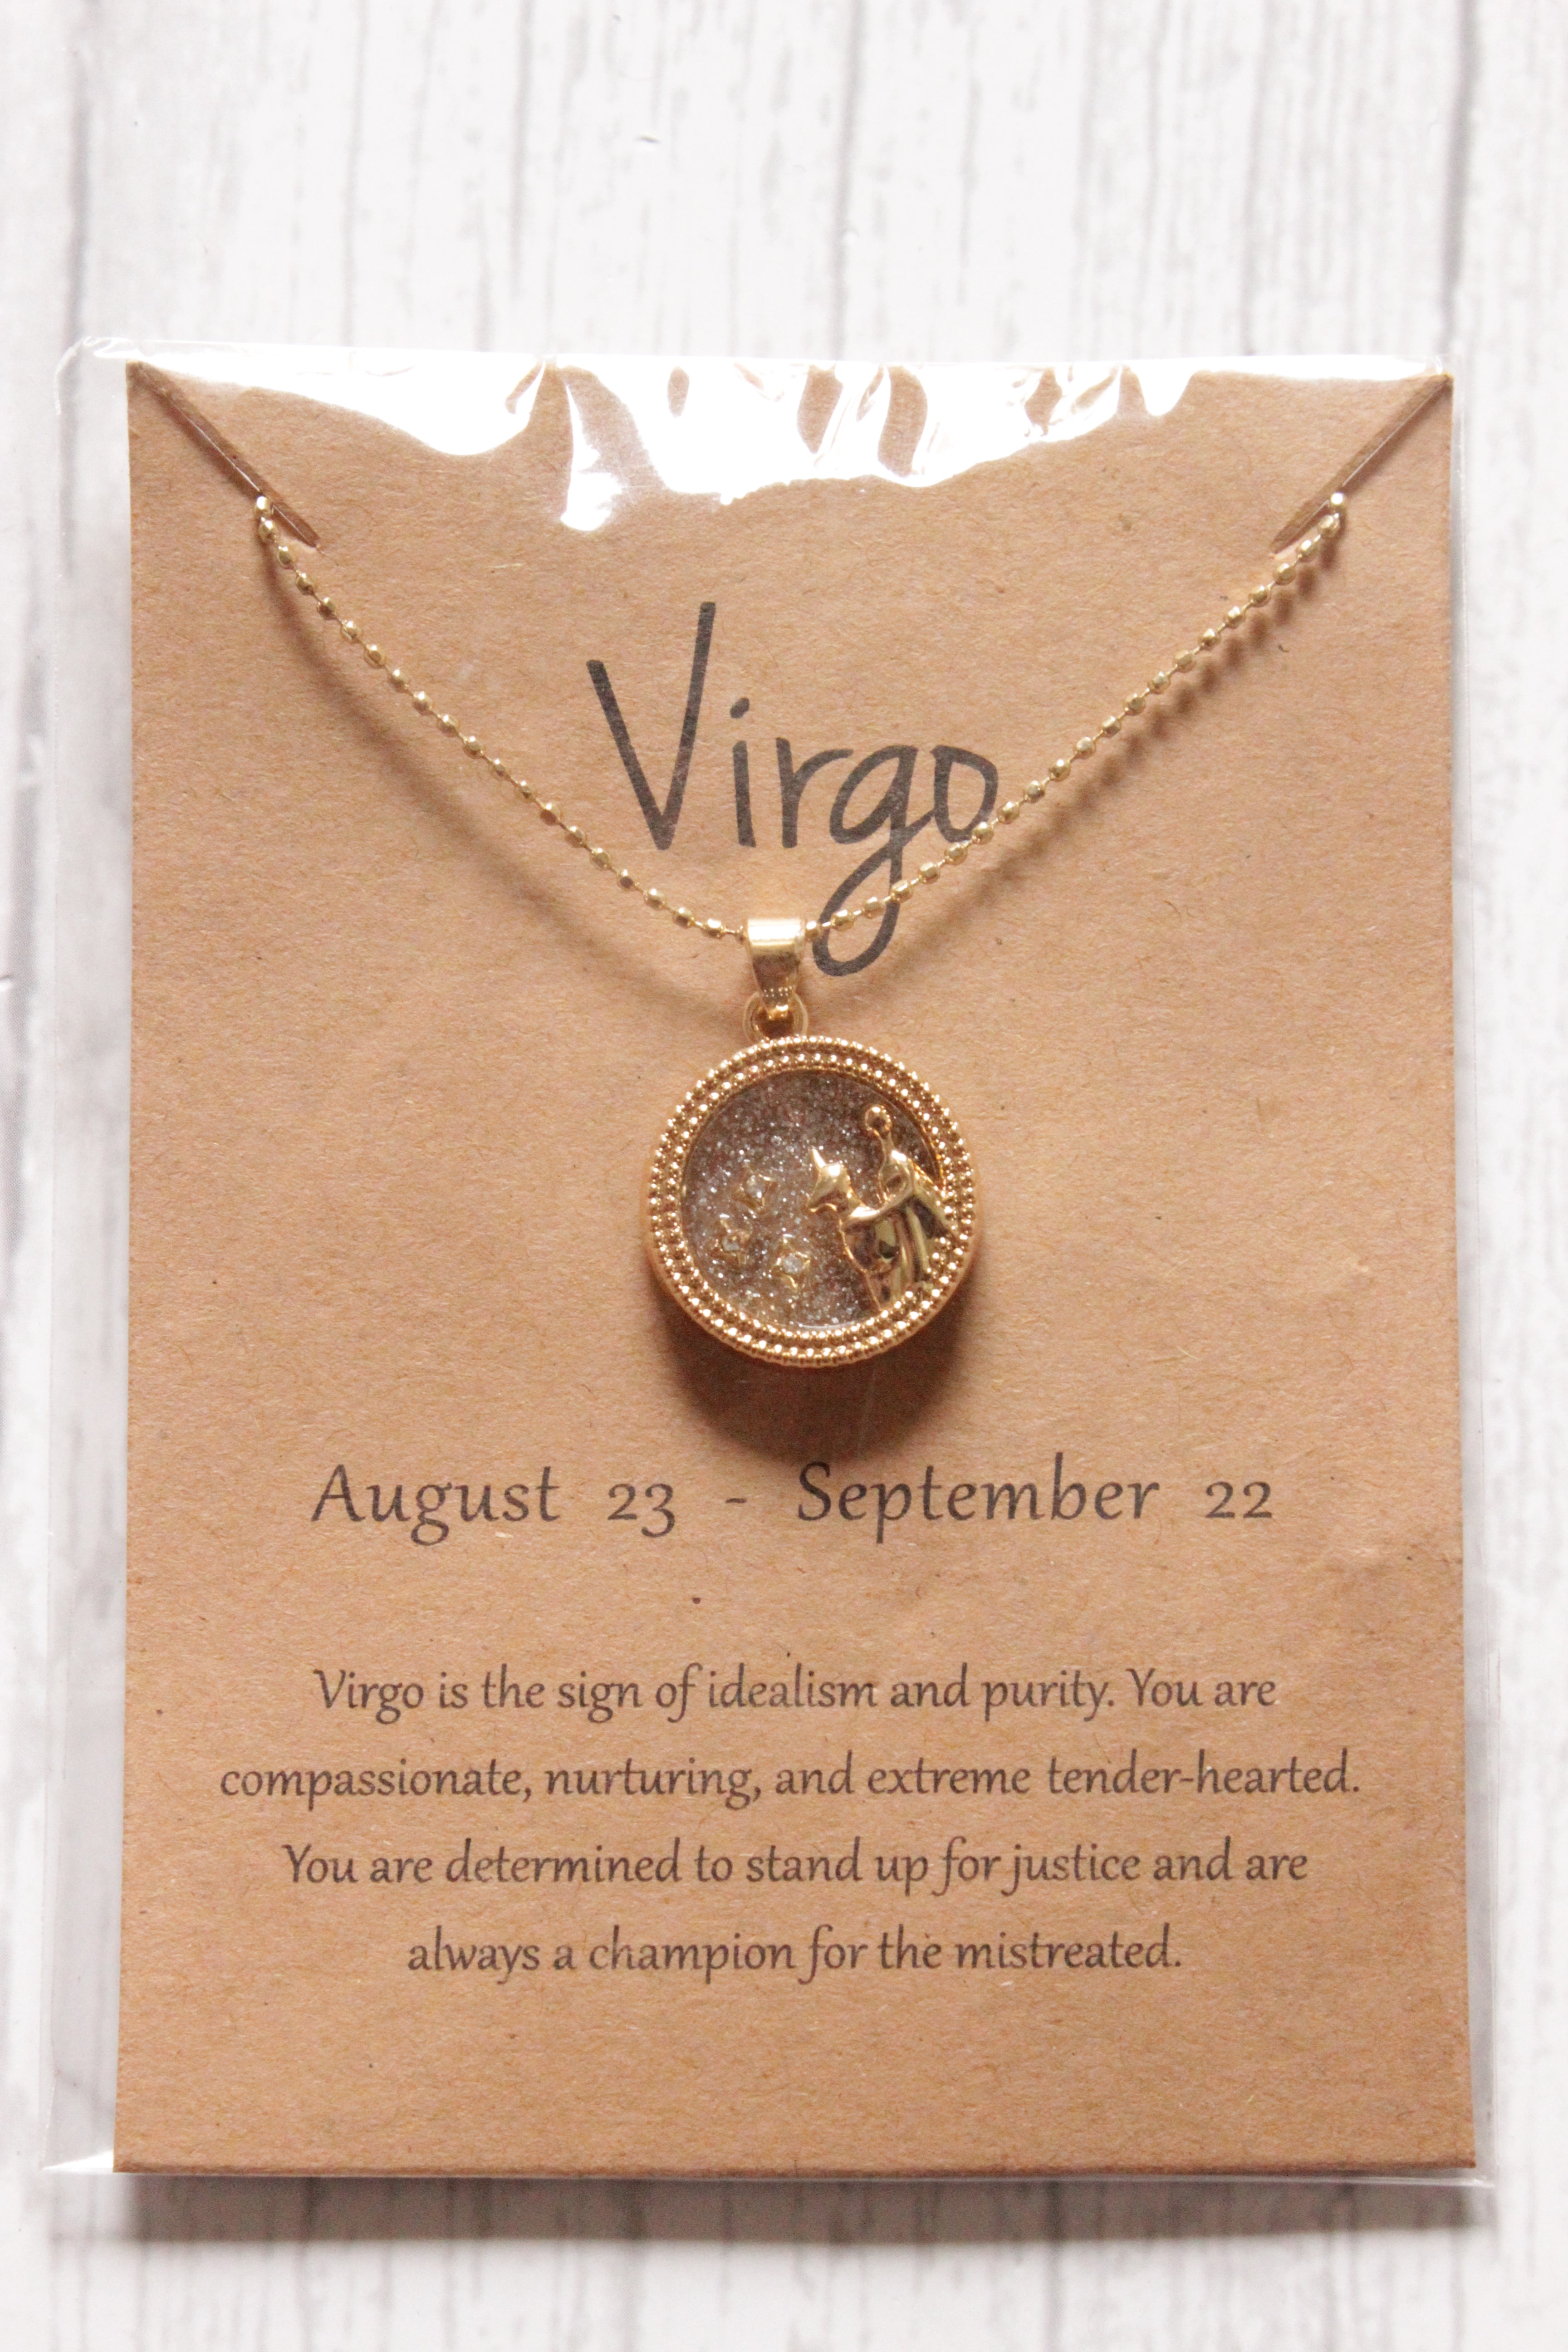 Virgo Sun Sign Gold Plated Day Style Round Resin Horoscope Astrology Minimalist Pendant Necklace with Card